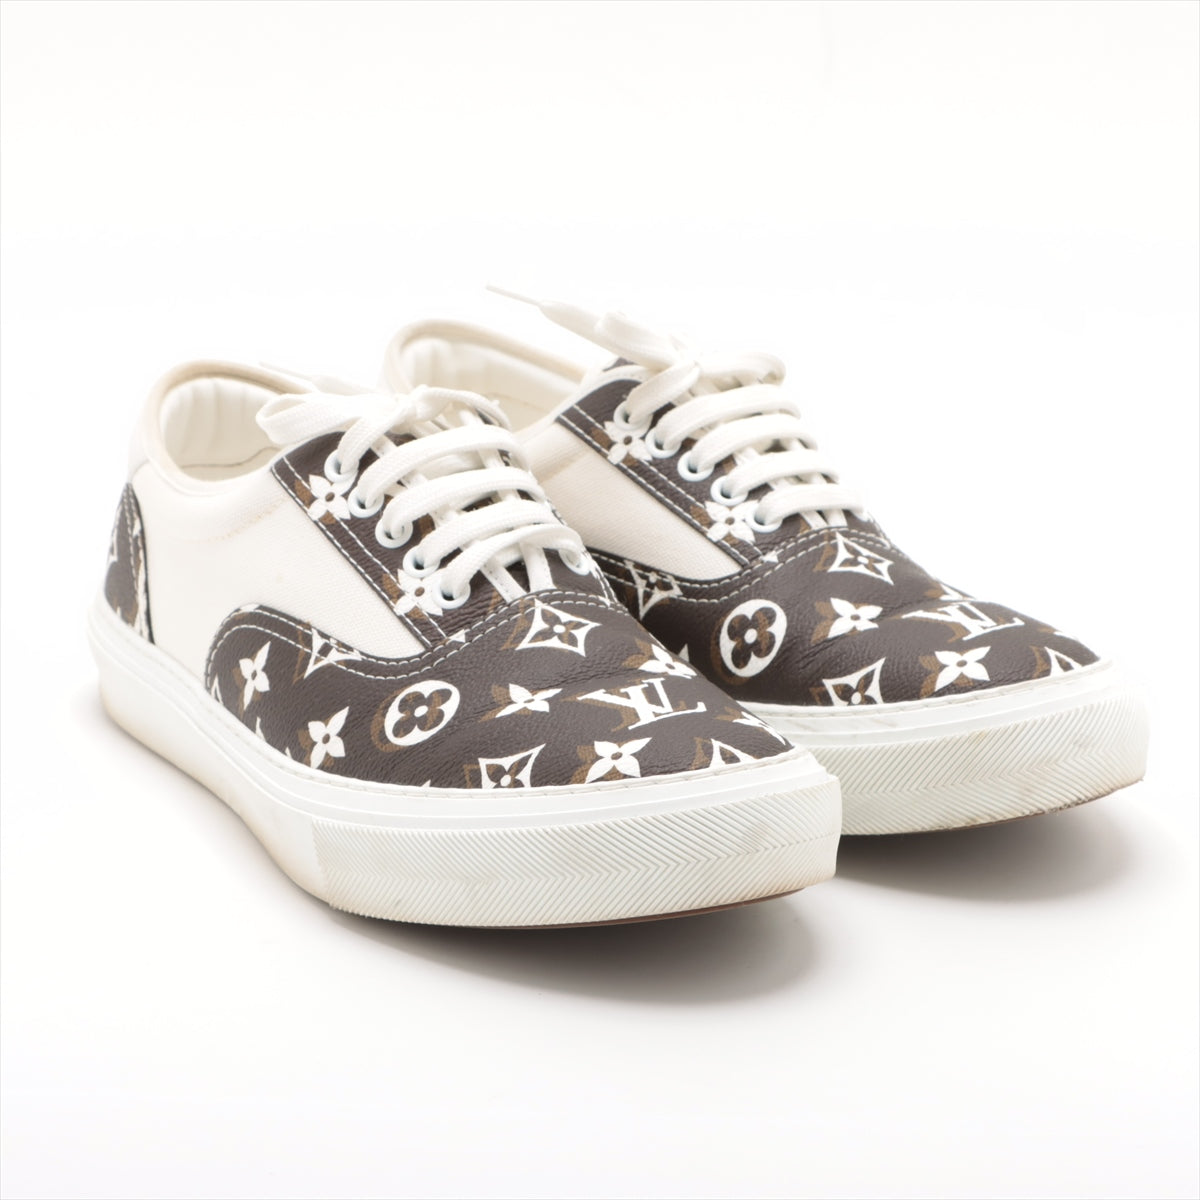 Louis Vuitton Trocadero line 19-year Canvas & leather Sneakers 8 1/2 Men's White x brown FA1109 Monogram Is there a replacement string